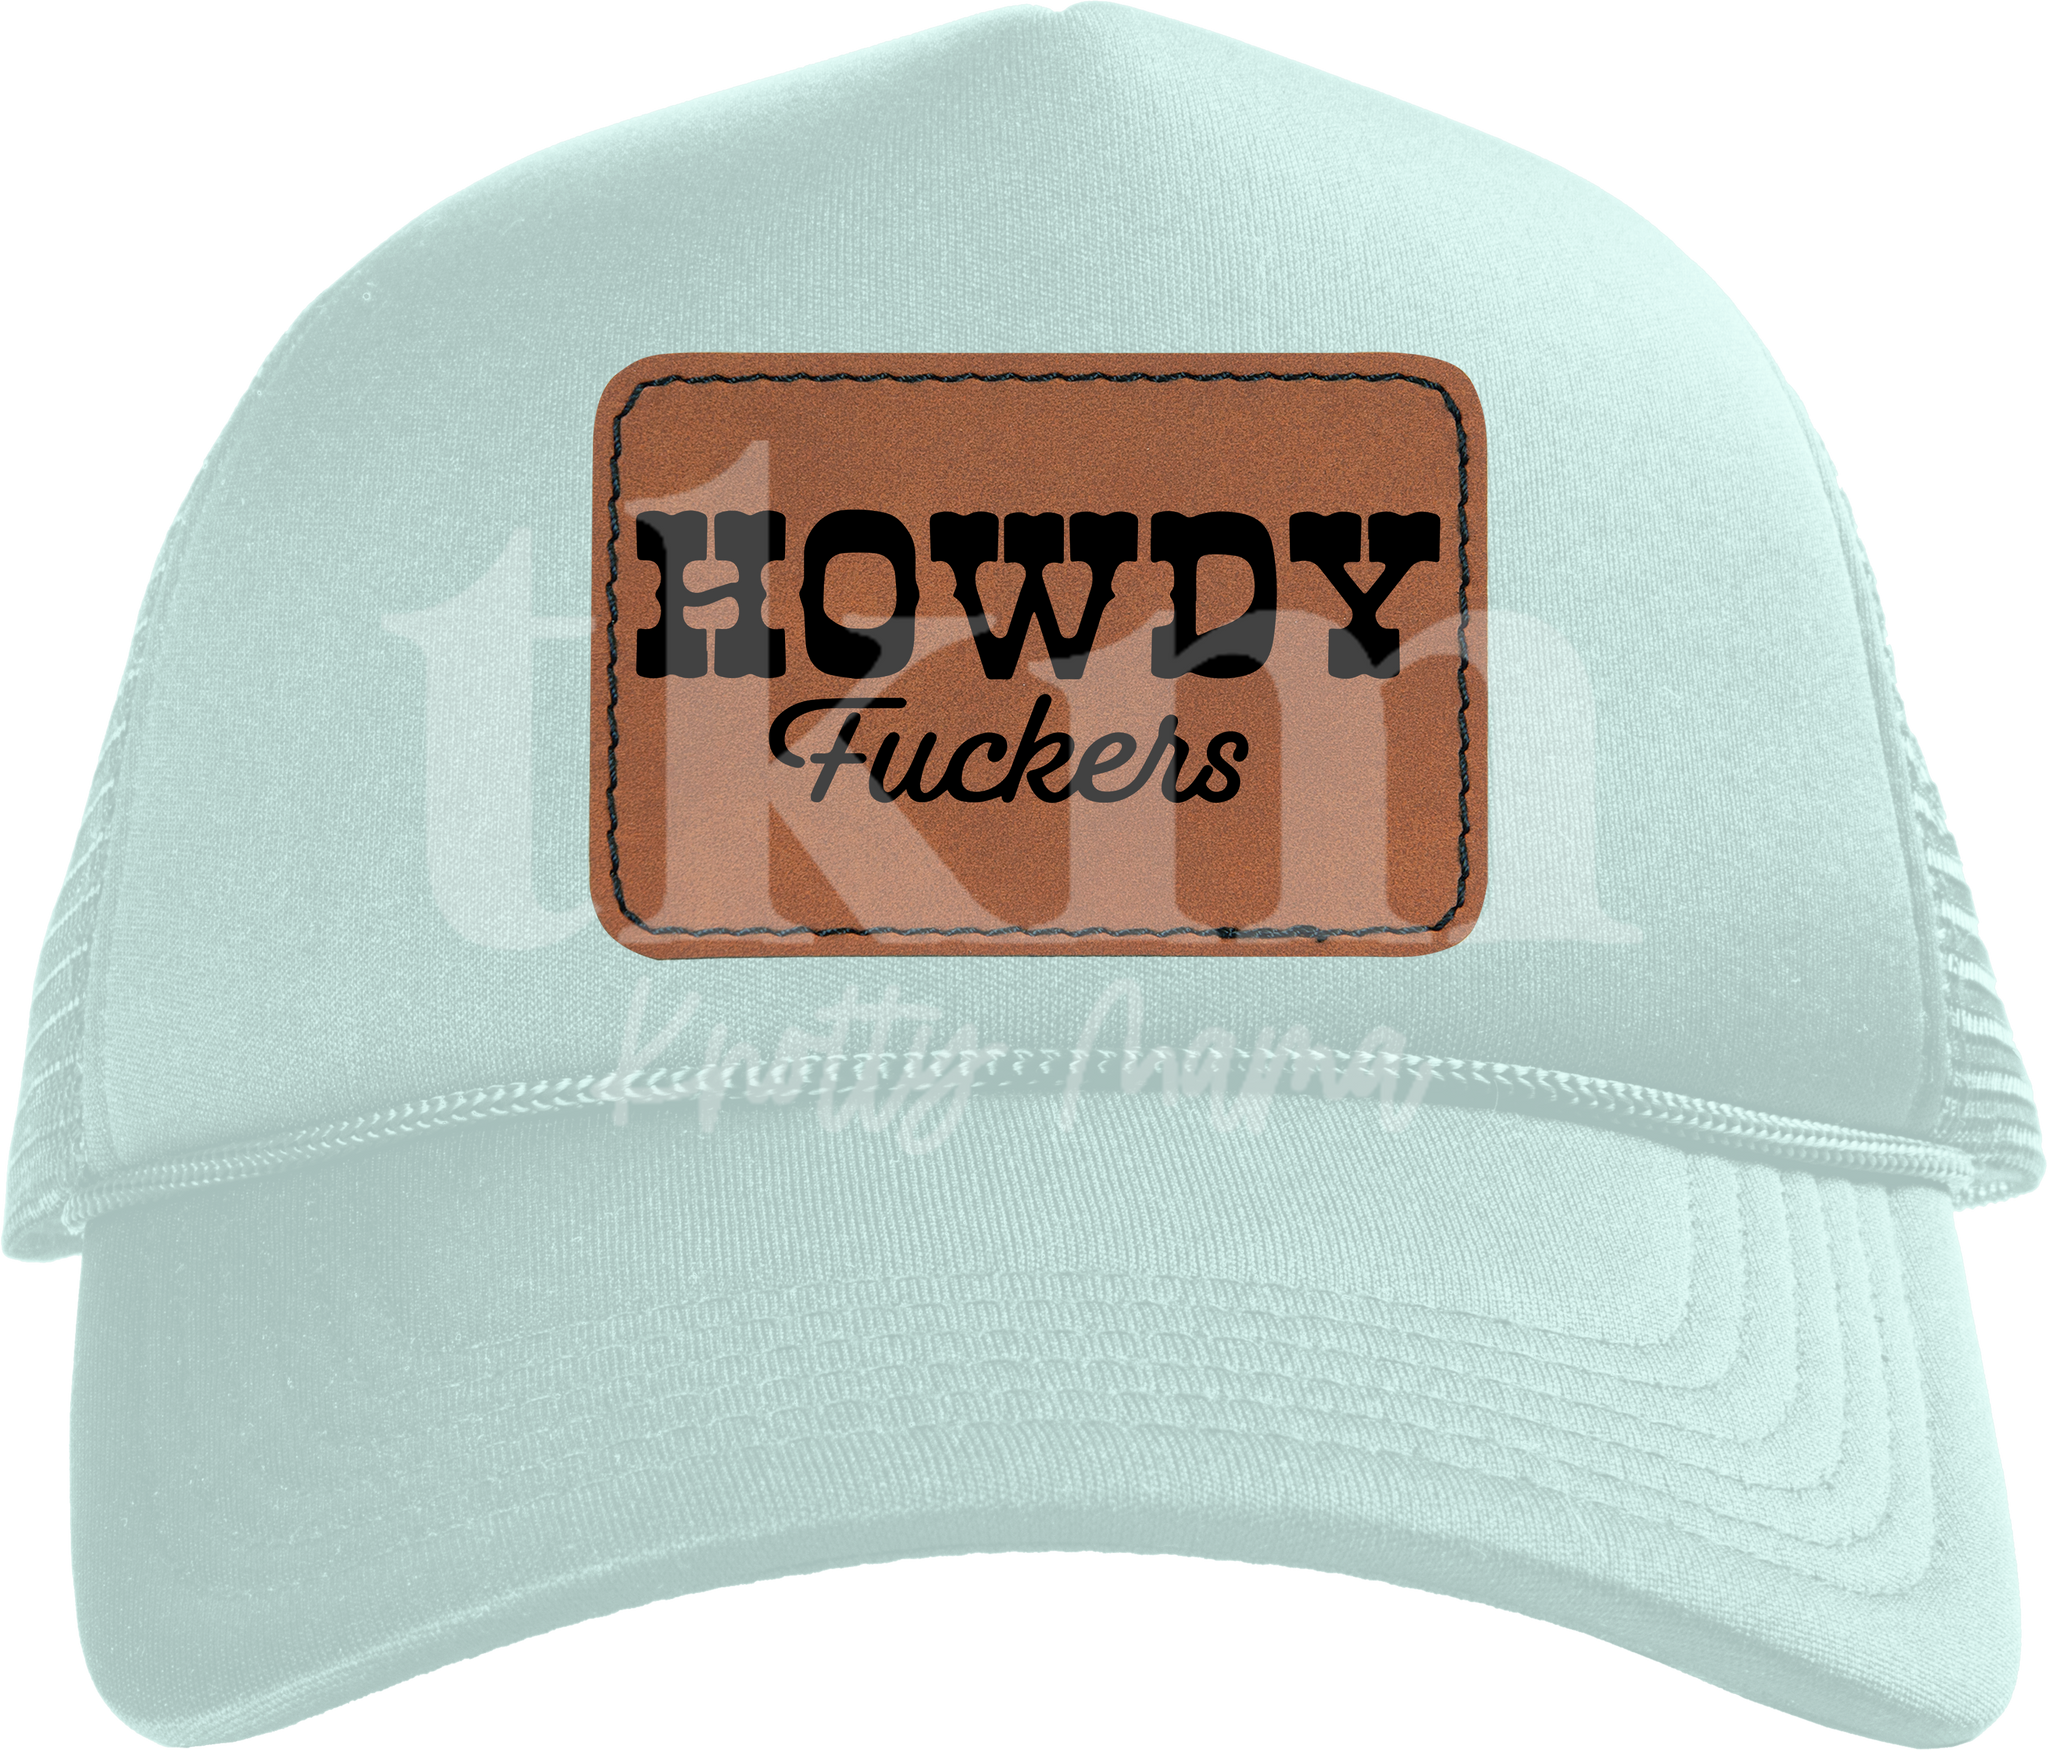 Howdy Fuckers Patch